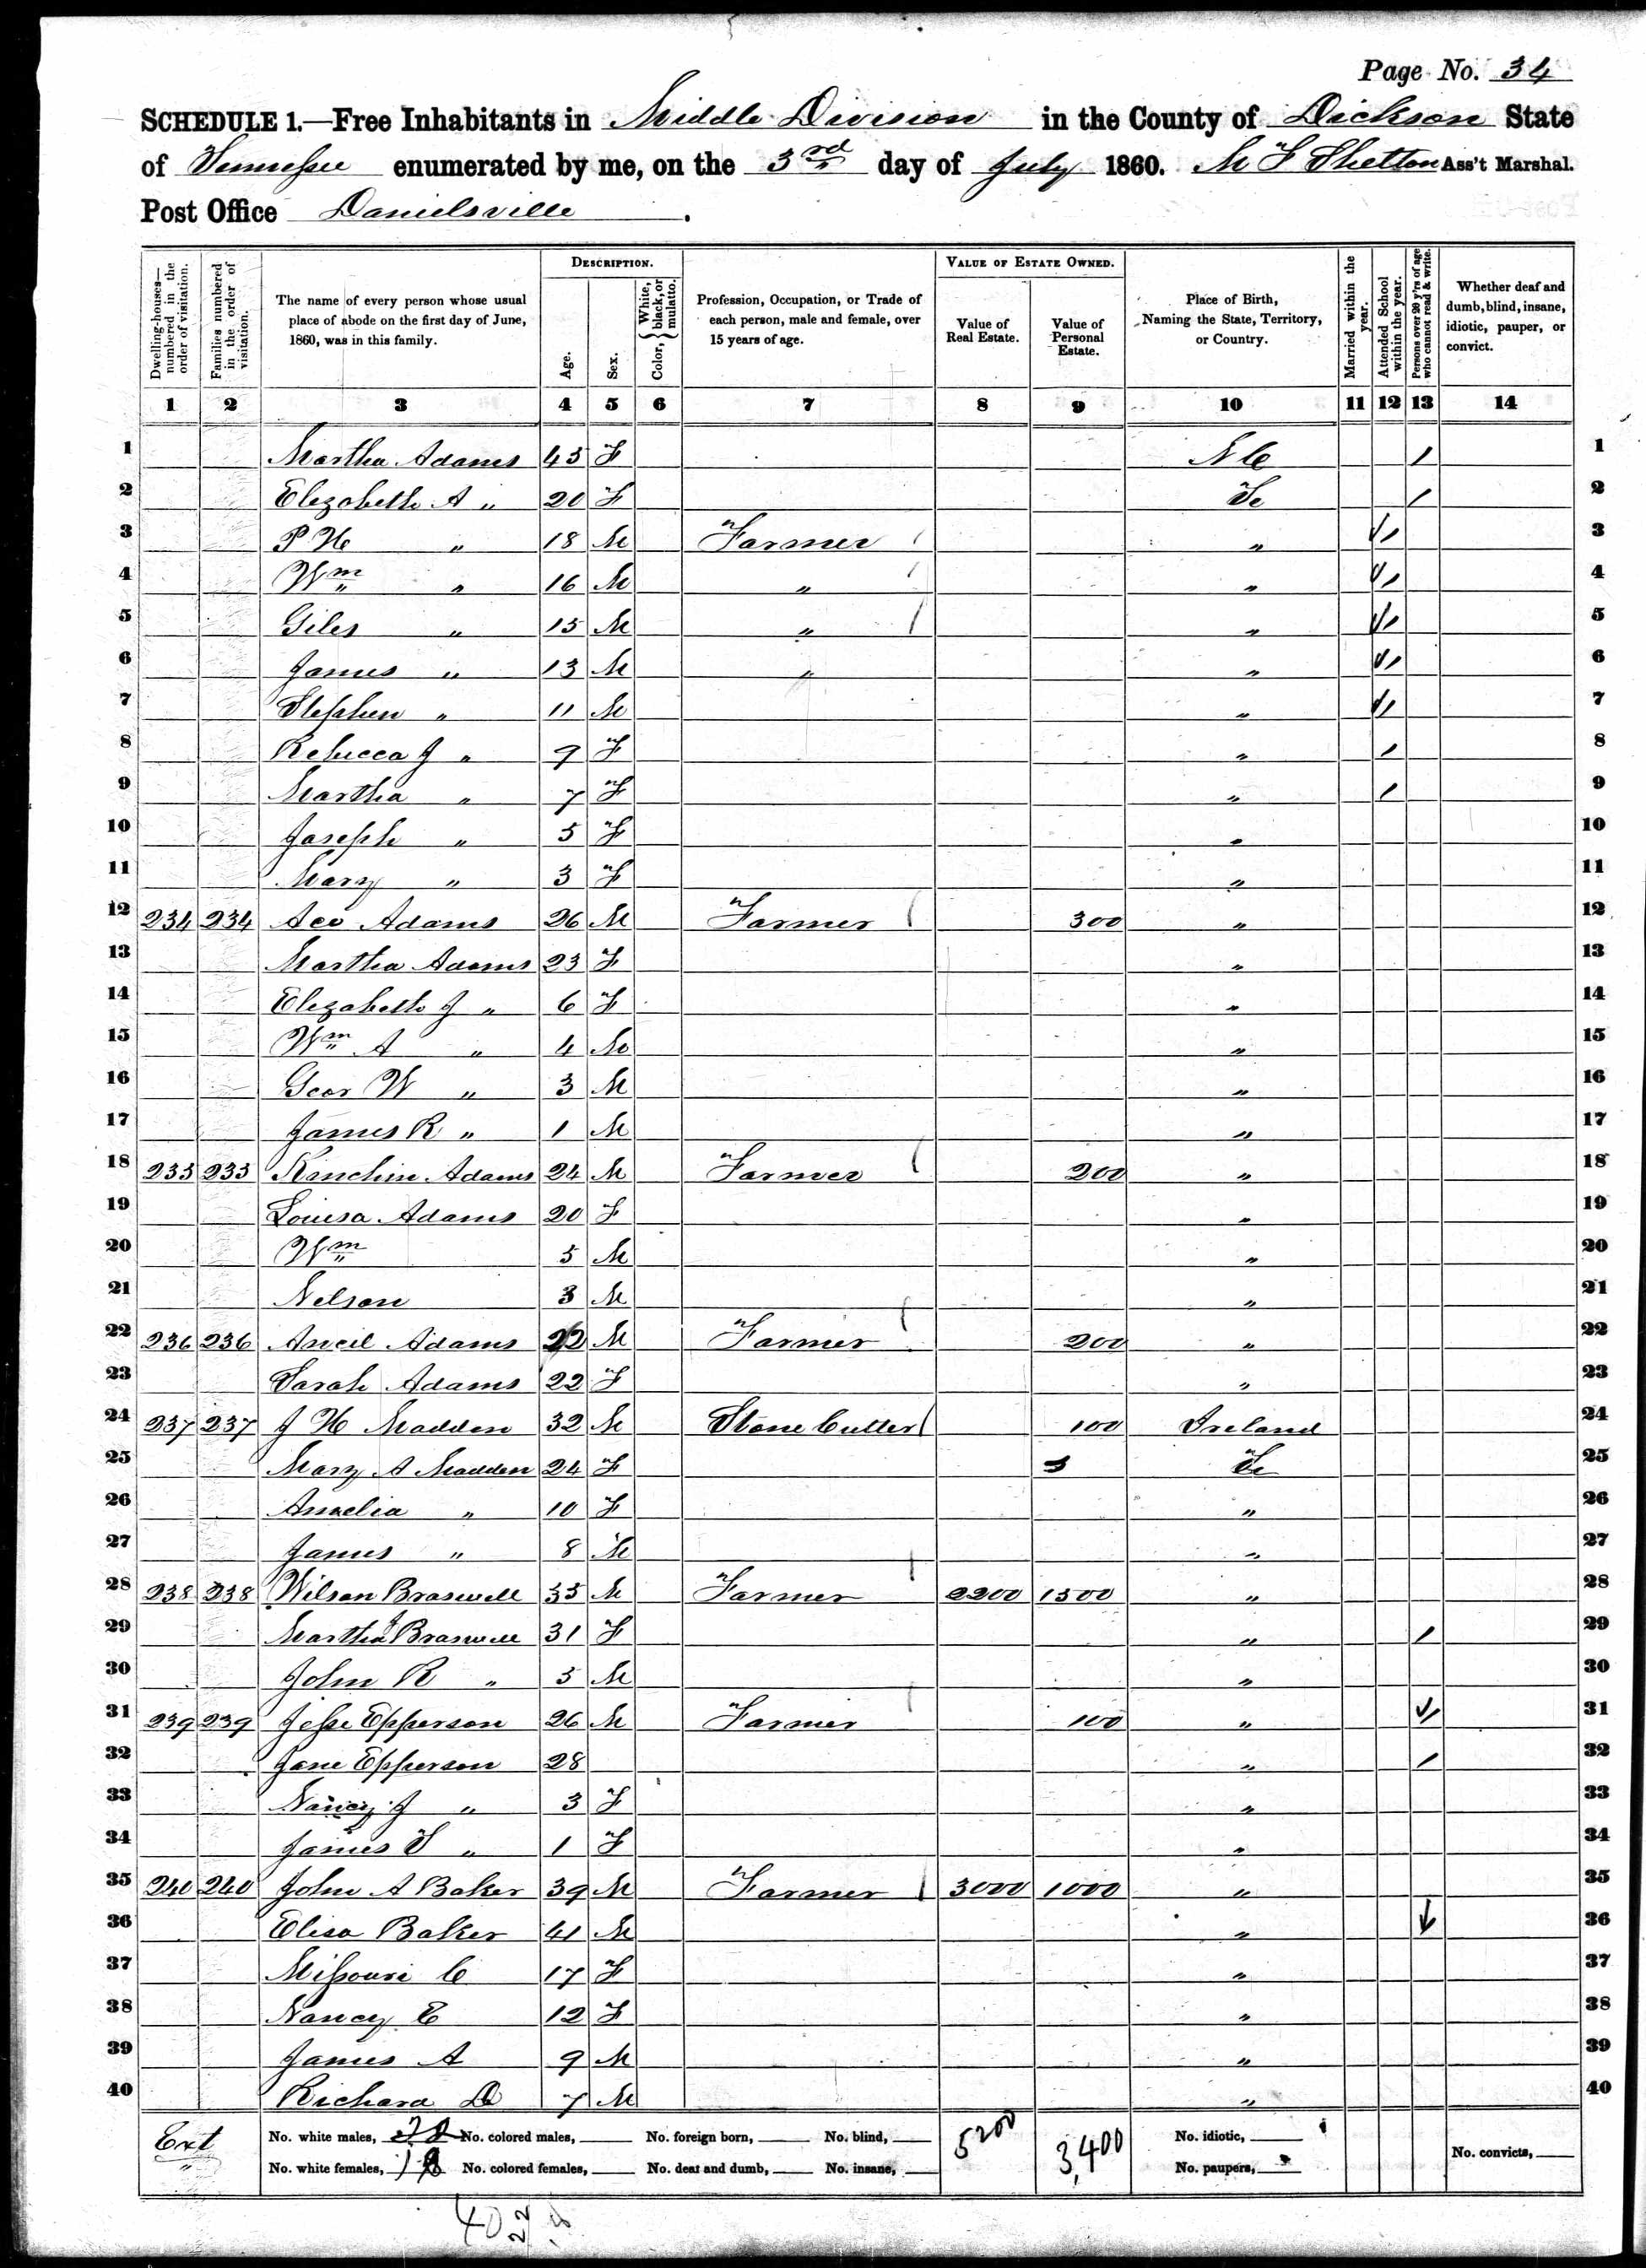 Wilson Brazzell and wife Martha J. Evans, 1860 Dickson County, Tennessee, census